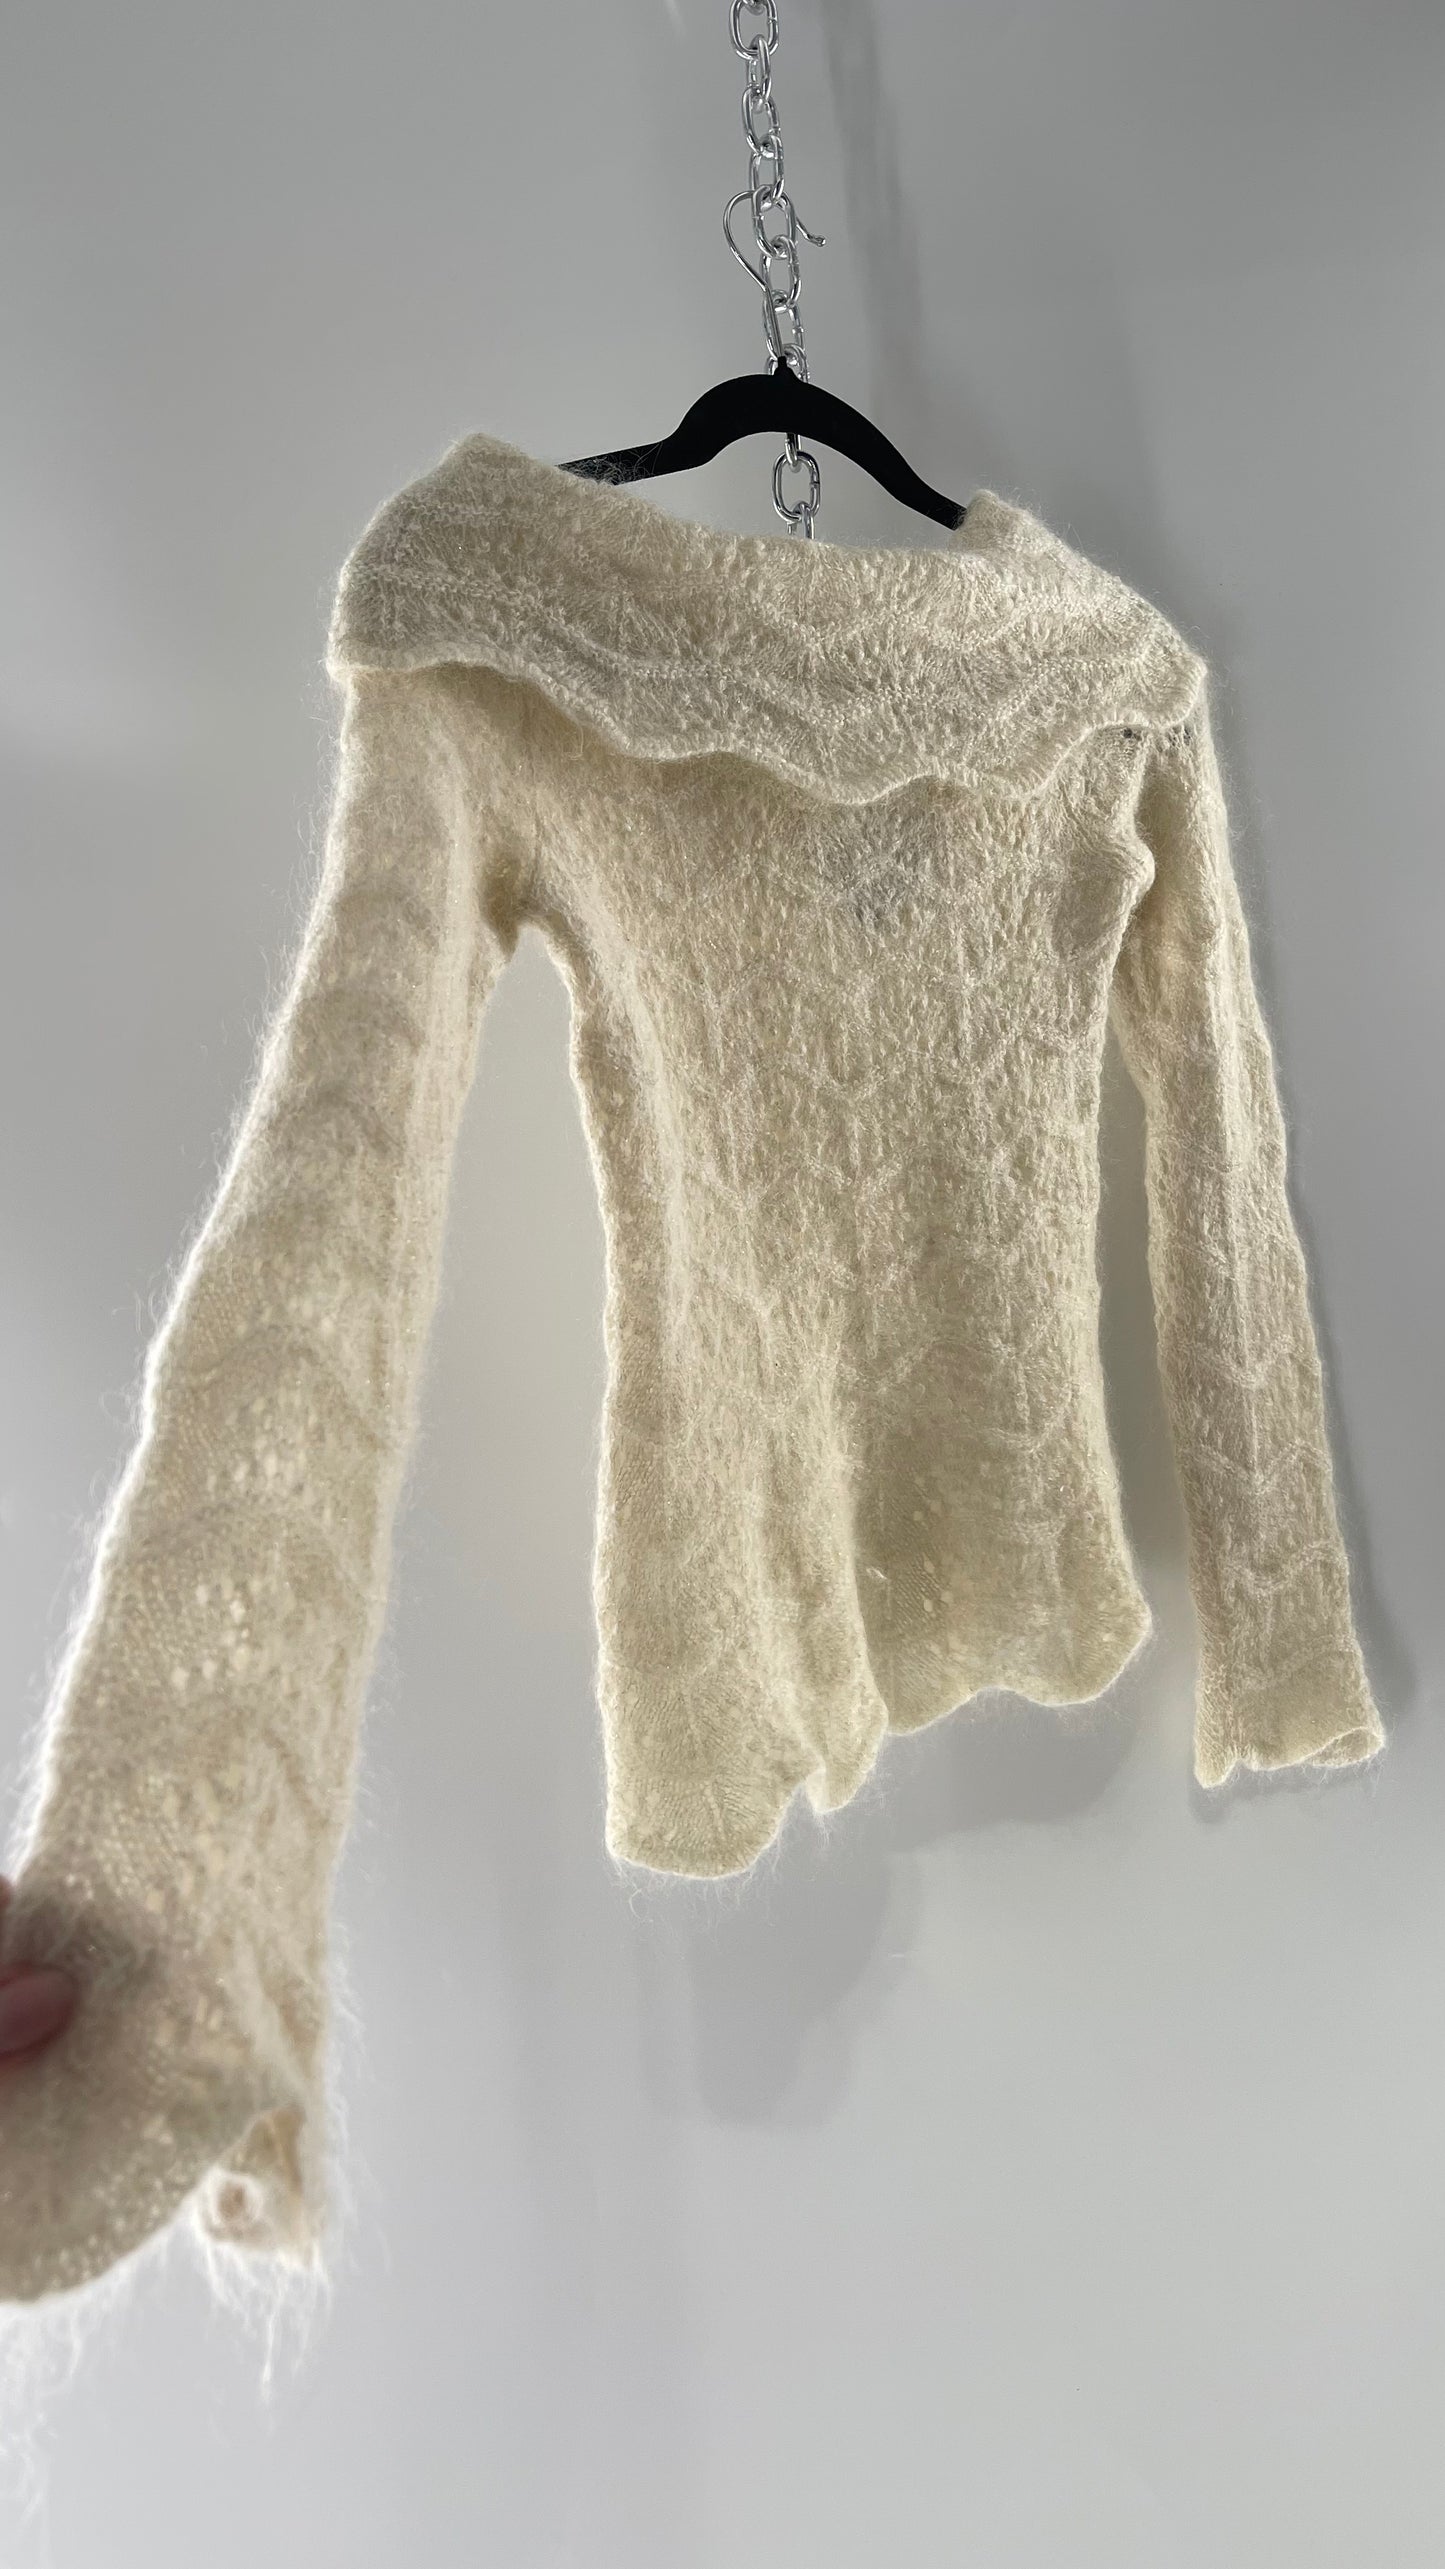 Vintage Ivory Off White Lace Knit Off the Shoulder Sweater Top (Medium)